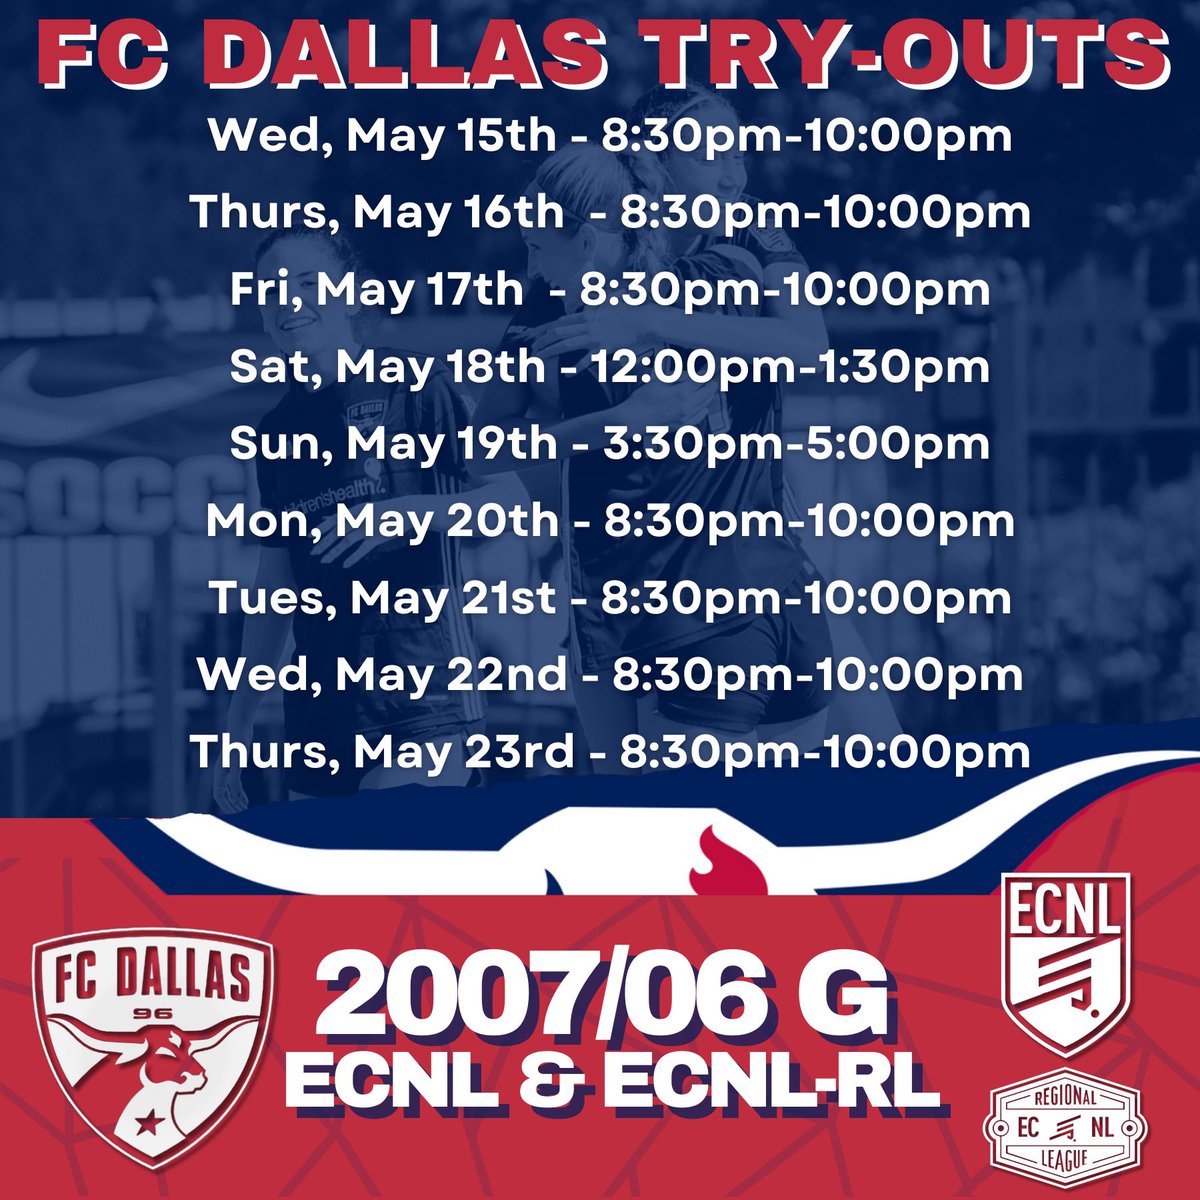 🚨FC Dallas 2024/25 07/06G ECNL-RL Info🚨 Excited for the upcoming year with Coach Gareth Evans! Swipe ➡️ for FC Dallas 2007G ECNL & ECNL-RL try out info and use the link below to sign up today! ⬇️ #DTID 💙⚽️❤️ forms.gle/m1yFosAhCmYGLT… @FCDwomen @GazEvans23